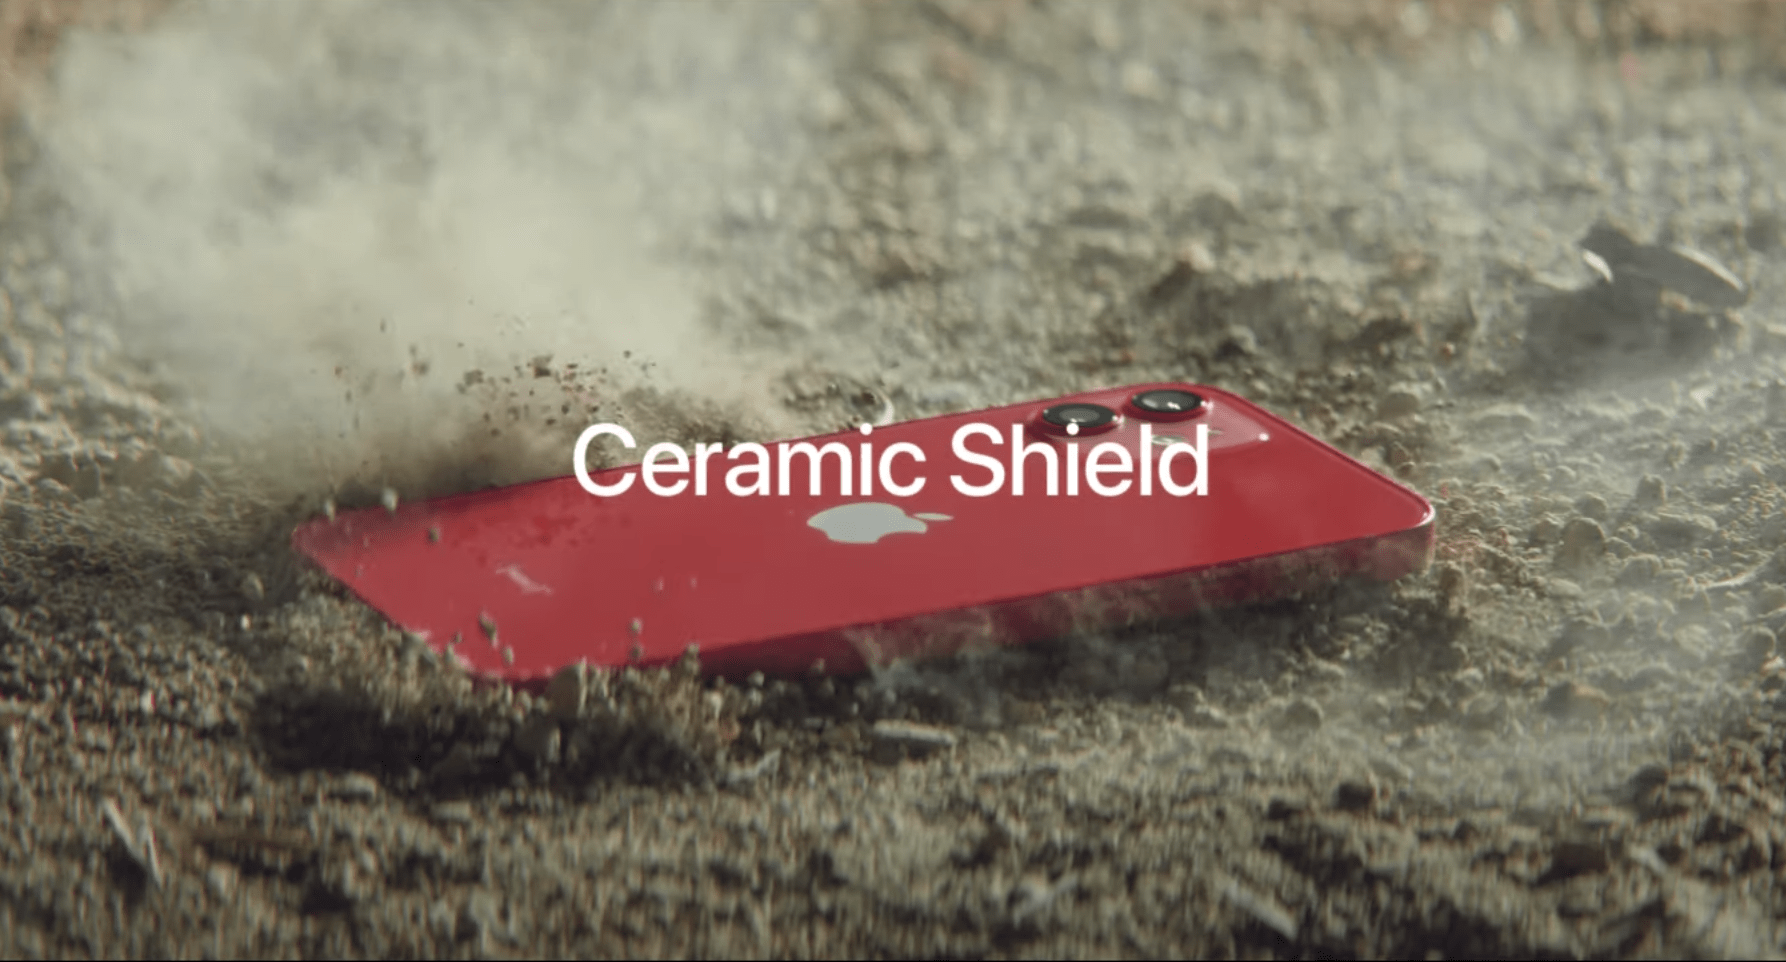 Apple Highlights iPhone 12 Ceramic Shield in “Fumble” ad